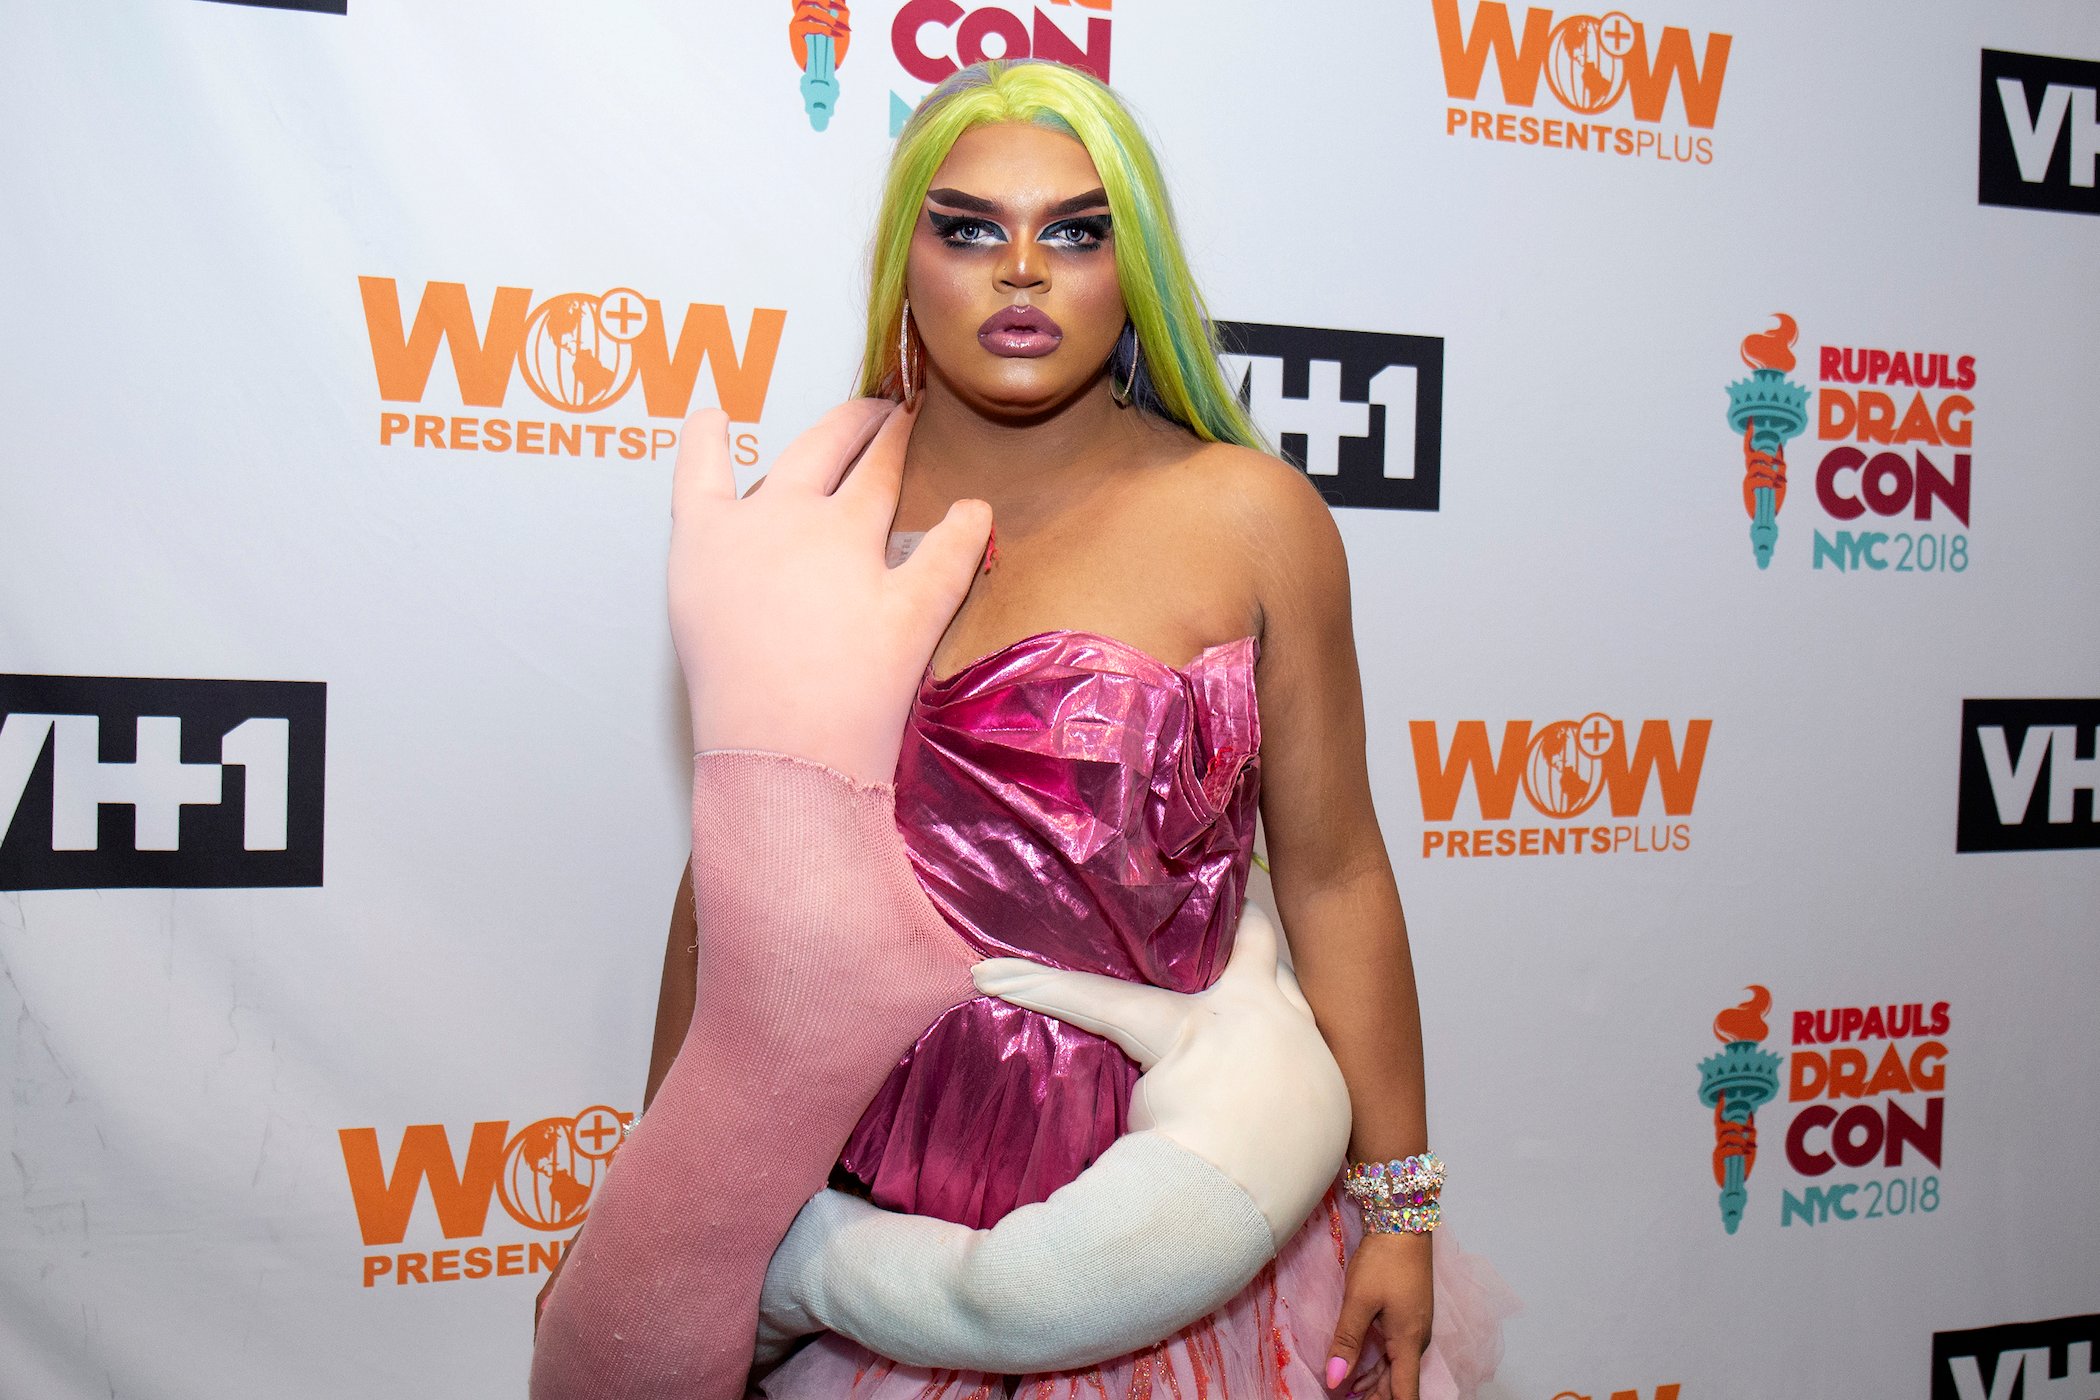 Kandy Muse attends RuPaul's DragCon NYC 2018